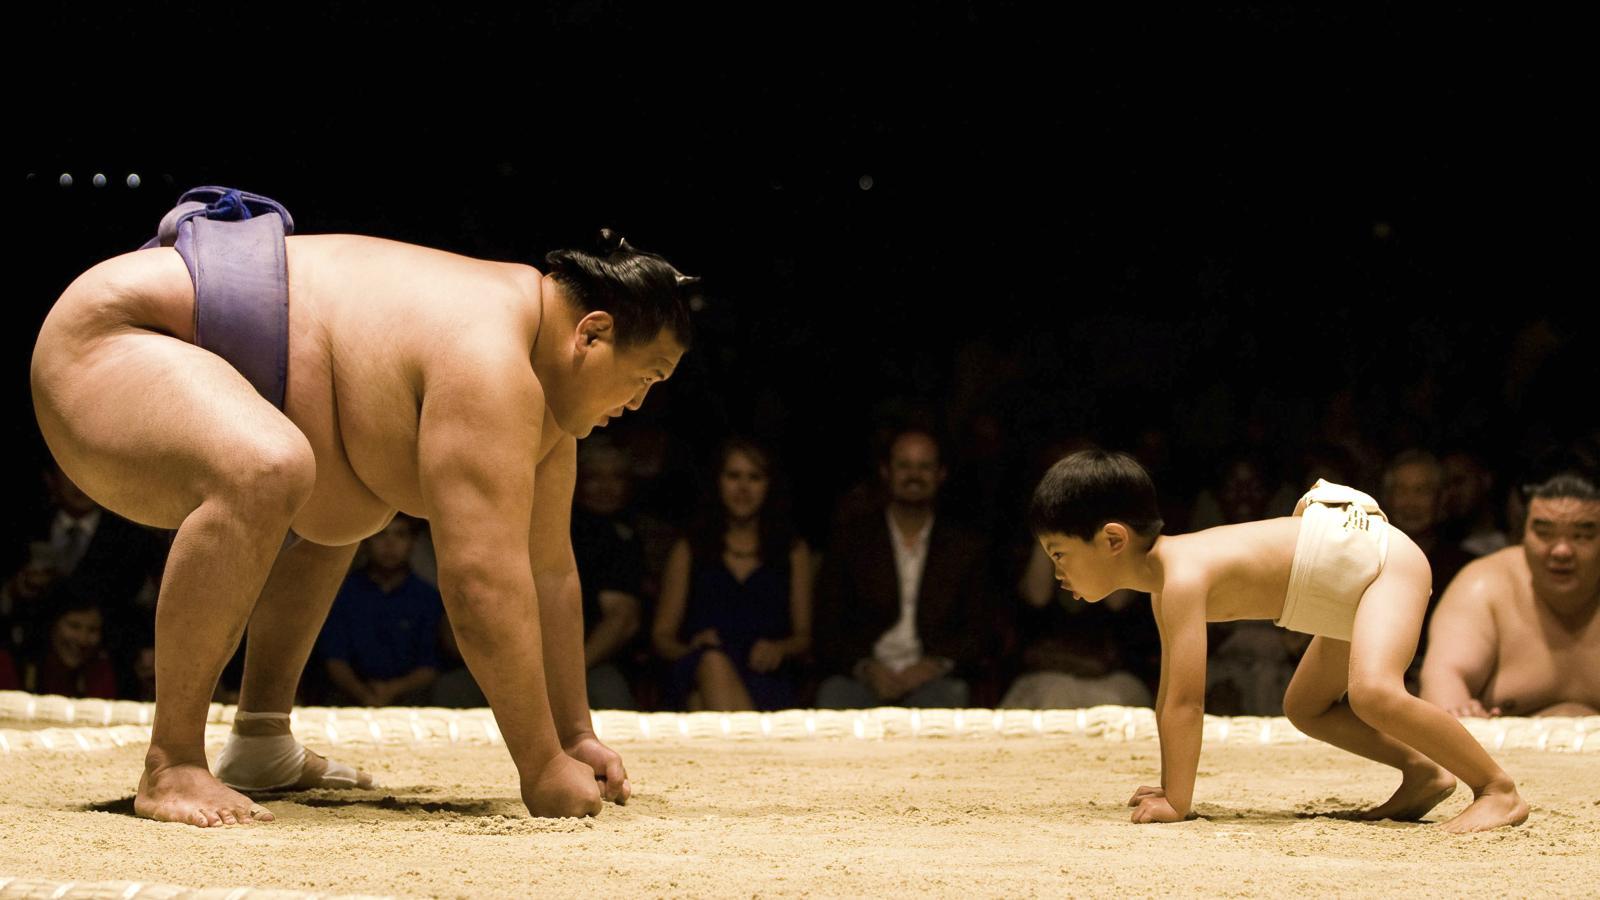 Airbnb and Marriott (MAR) have turned to sumo wrestling